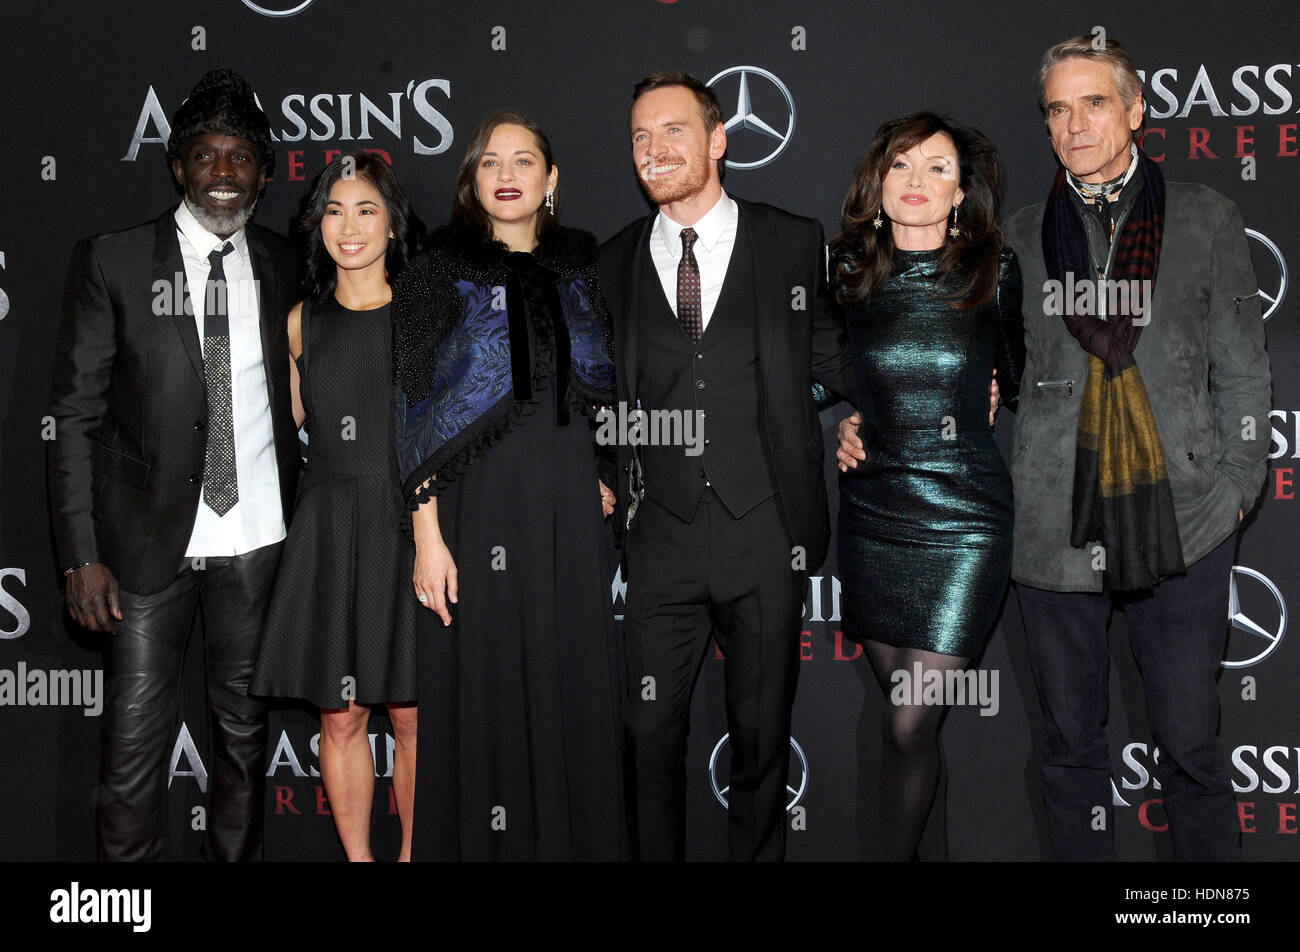 New York, USA. 13th December, 2016. Michael K. Williams, Marion Cotillard, Michael Fassbender, Essie Davis and Jeremy Irons attend the 'Assassin's Creed' New York premiere at AMC Empire 25 theater on December 13, 2016 in New York City.Photo by: John Palmer/MediaPunch Credit:  MediaPunch Inc/Alamy Live News Stock Photo